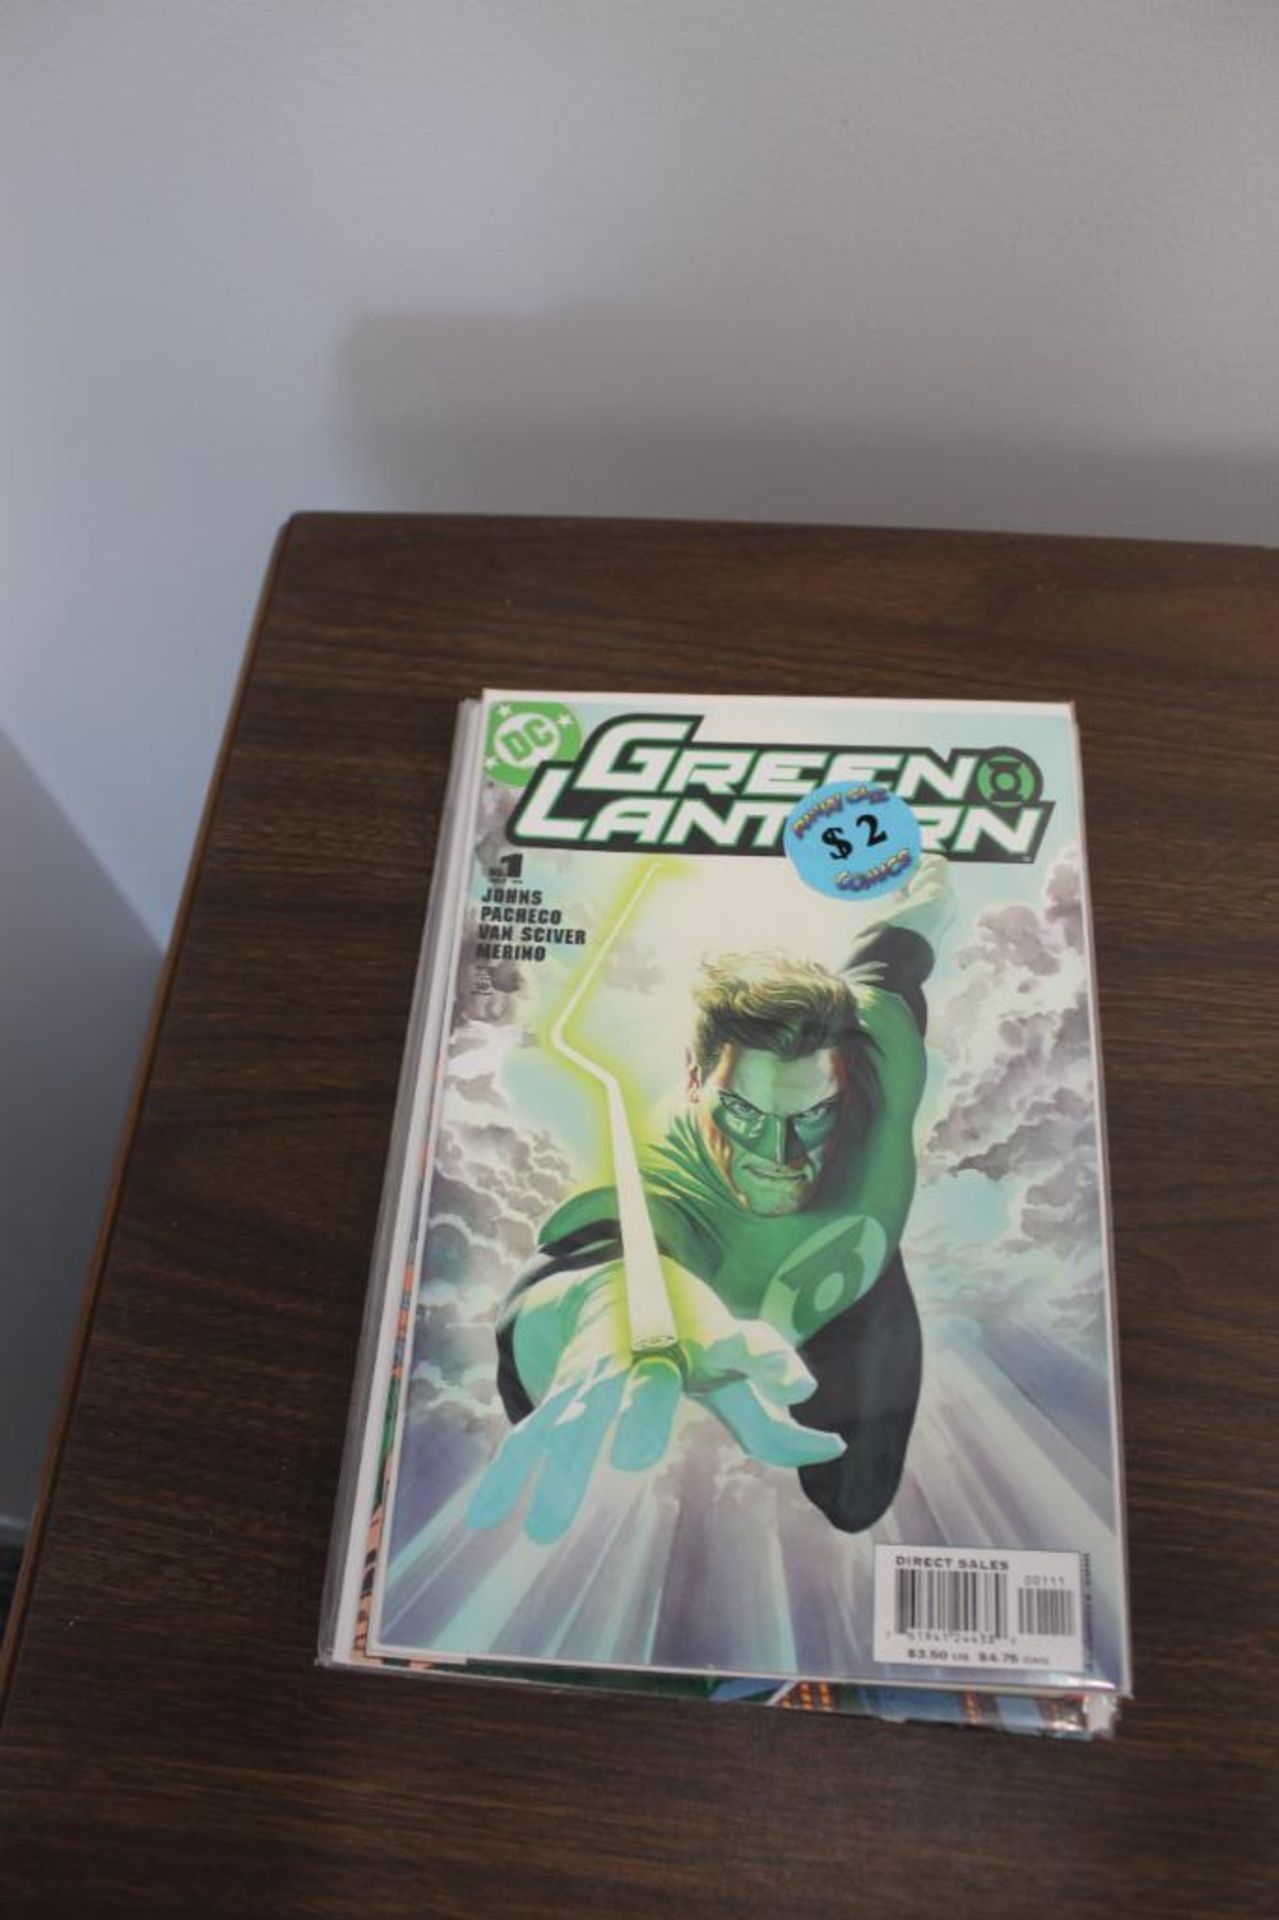 Lot of Comics - Green Lantern and Other Grapic Novels - Image 5 of 11